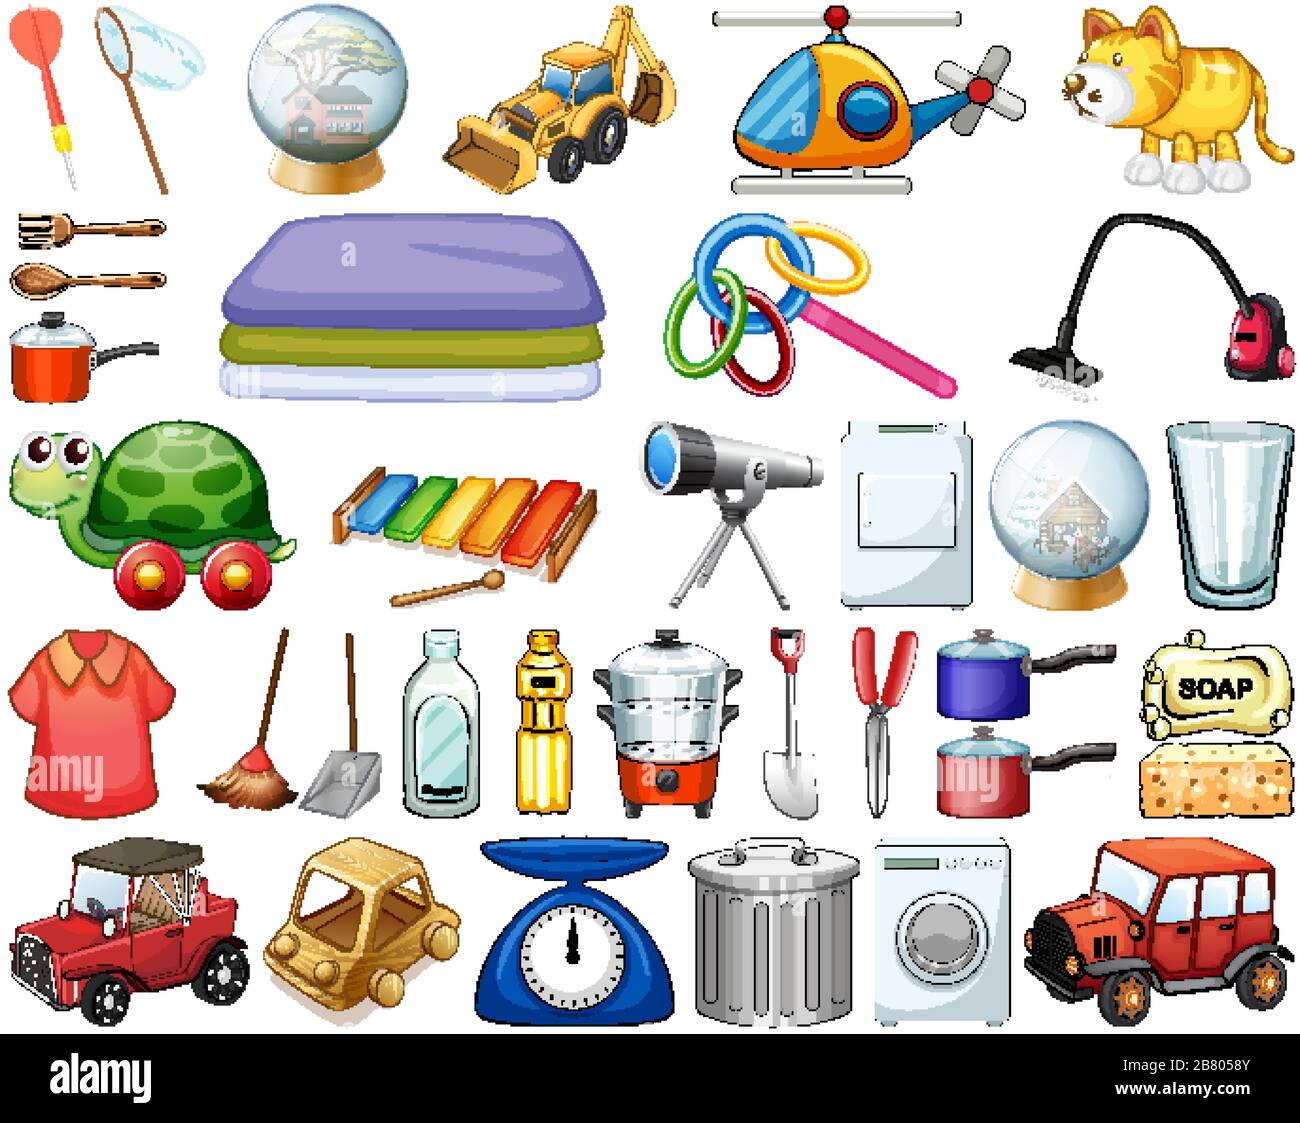 Large Set Of Household Items And Many Toys On White Background